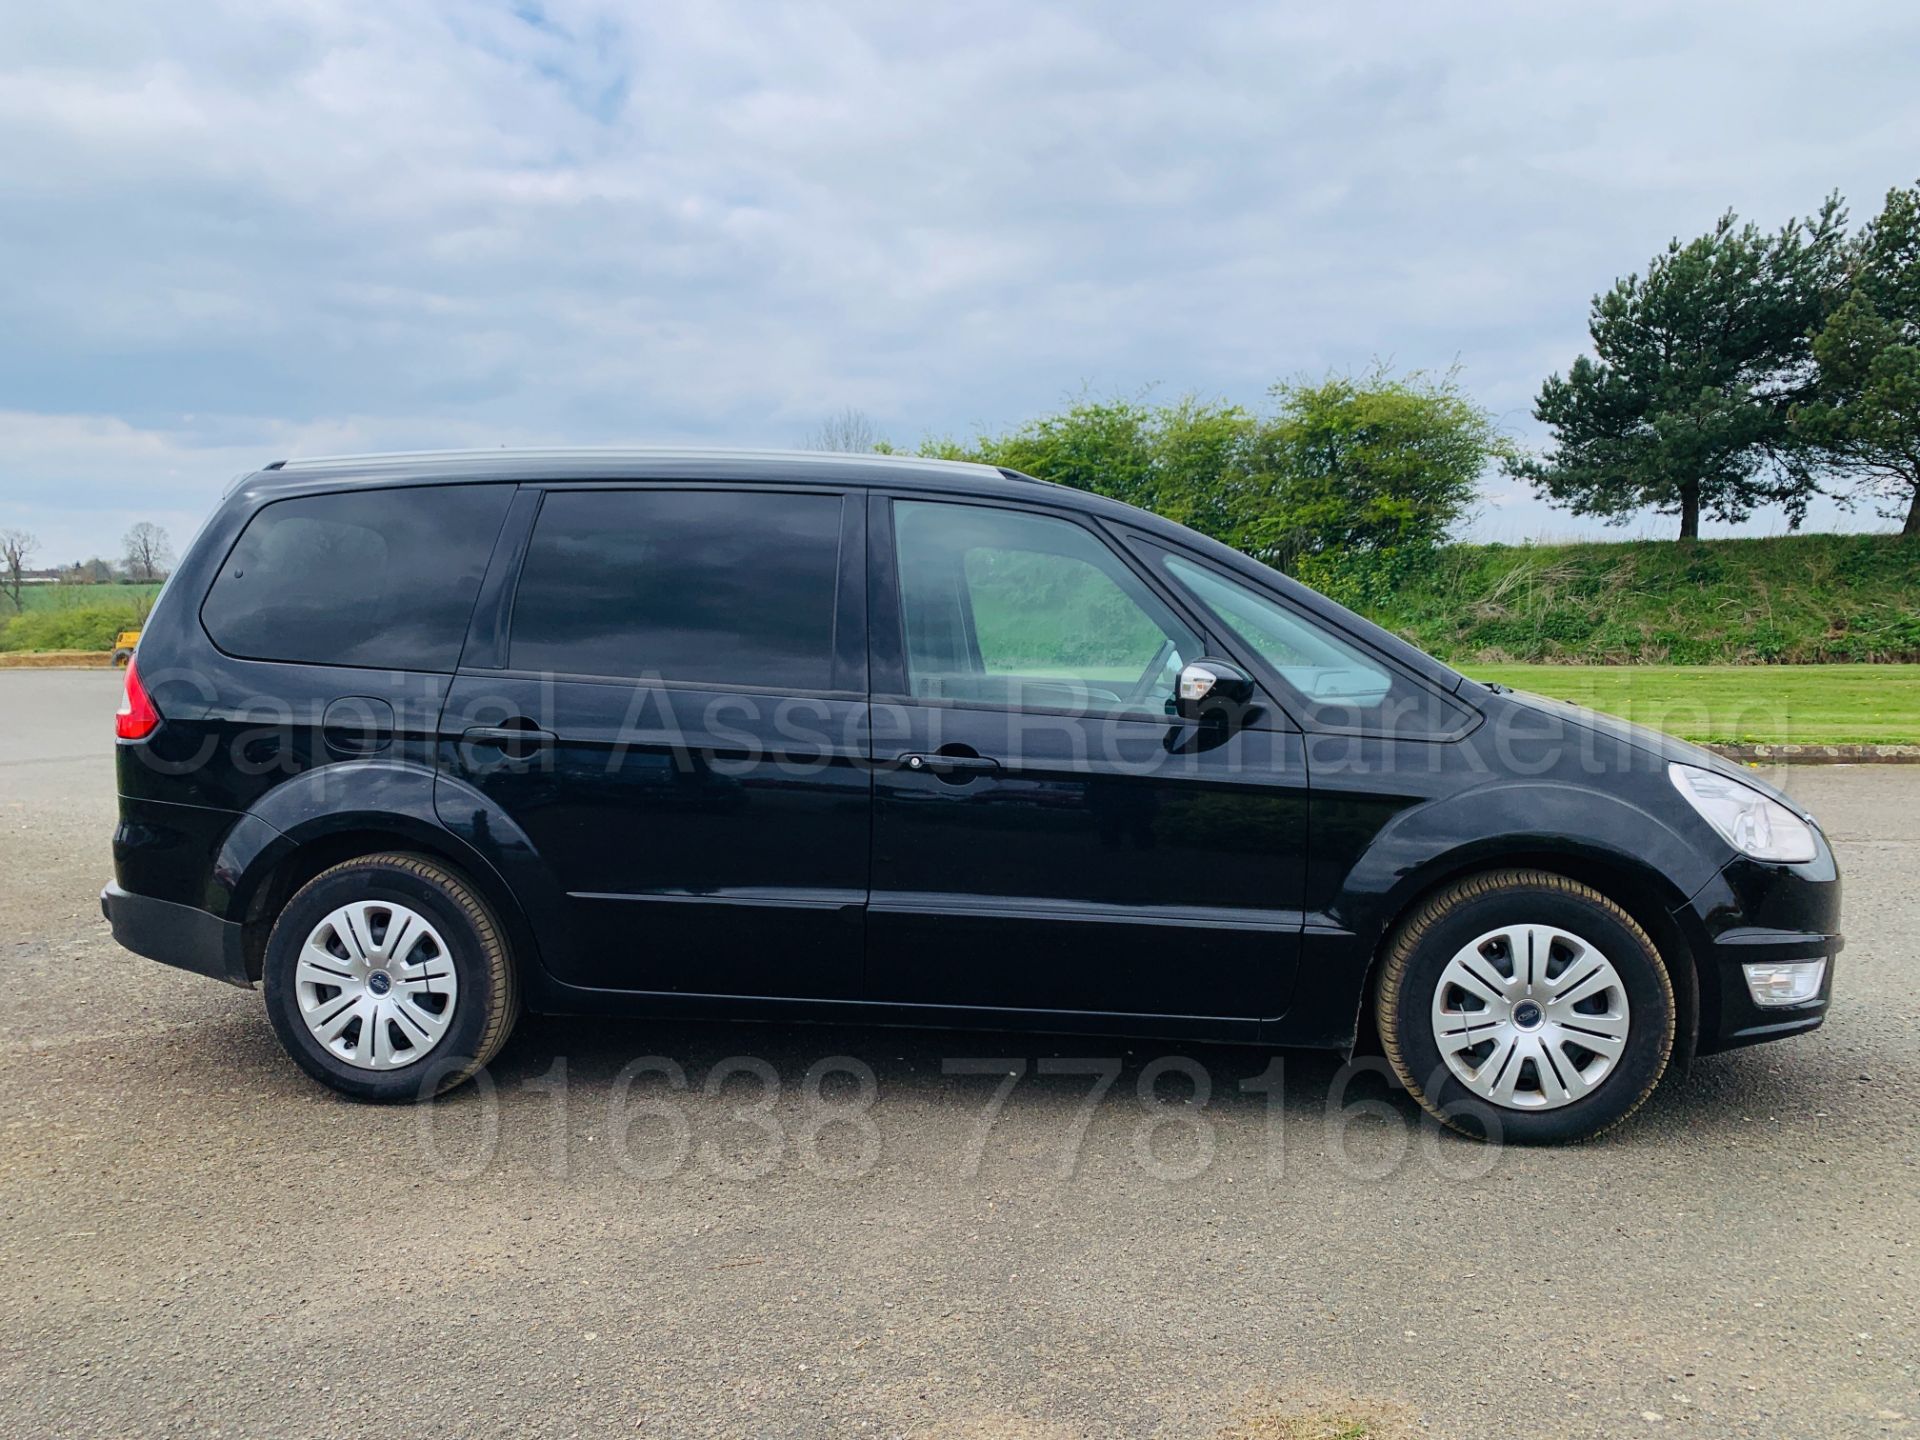 ON SALE FORD GALAXY *ZETEC* 7 SEATER MPV (2016 MODEL) '2.0 TDCI - 140 BHP - POWER SHIFT' (1 OWNER) - Image 12 of 40